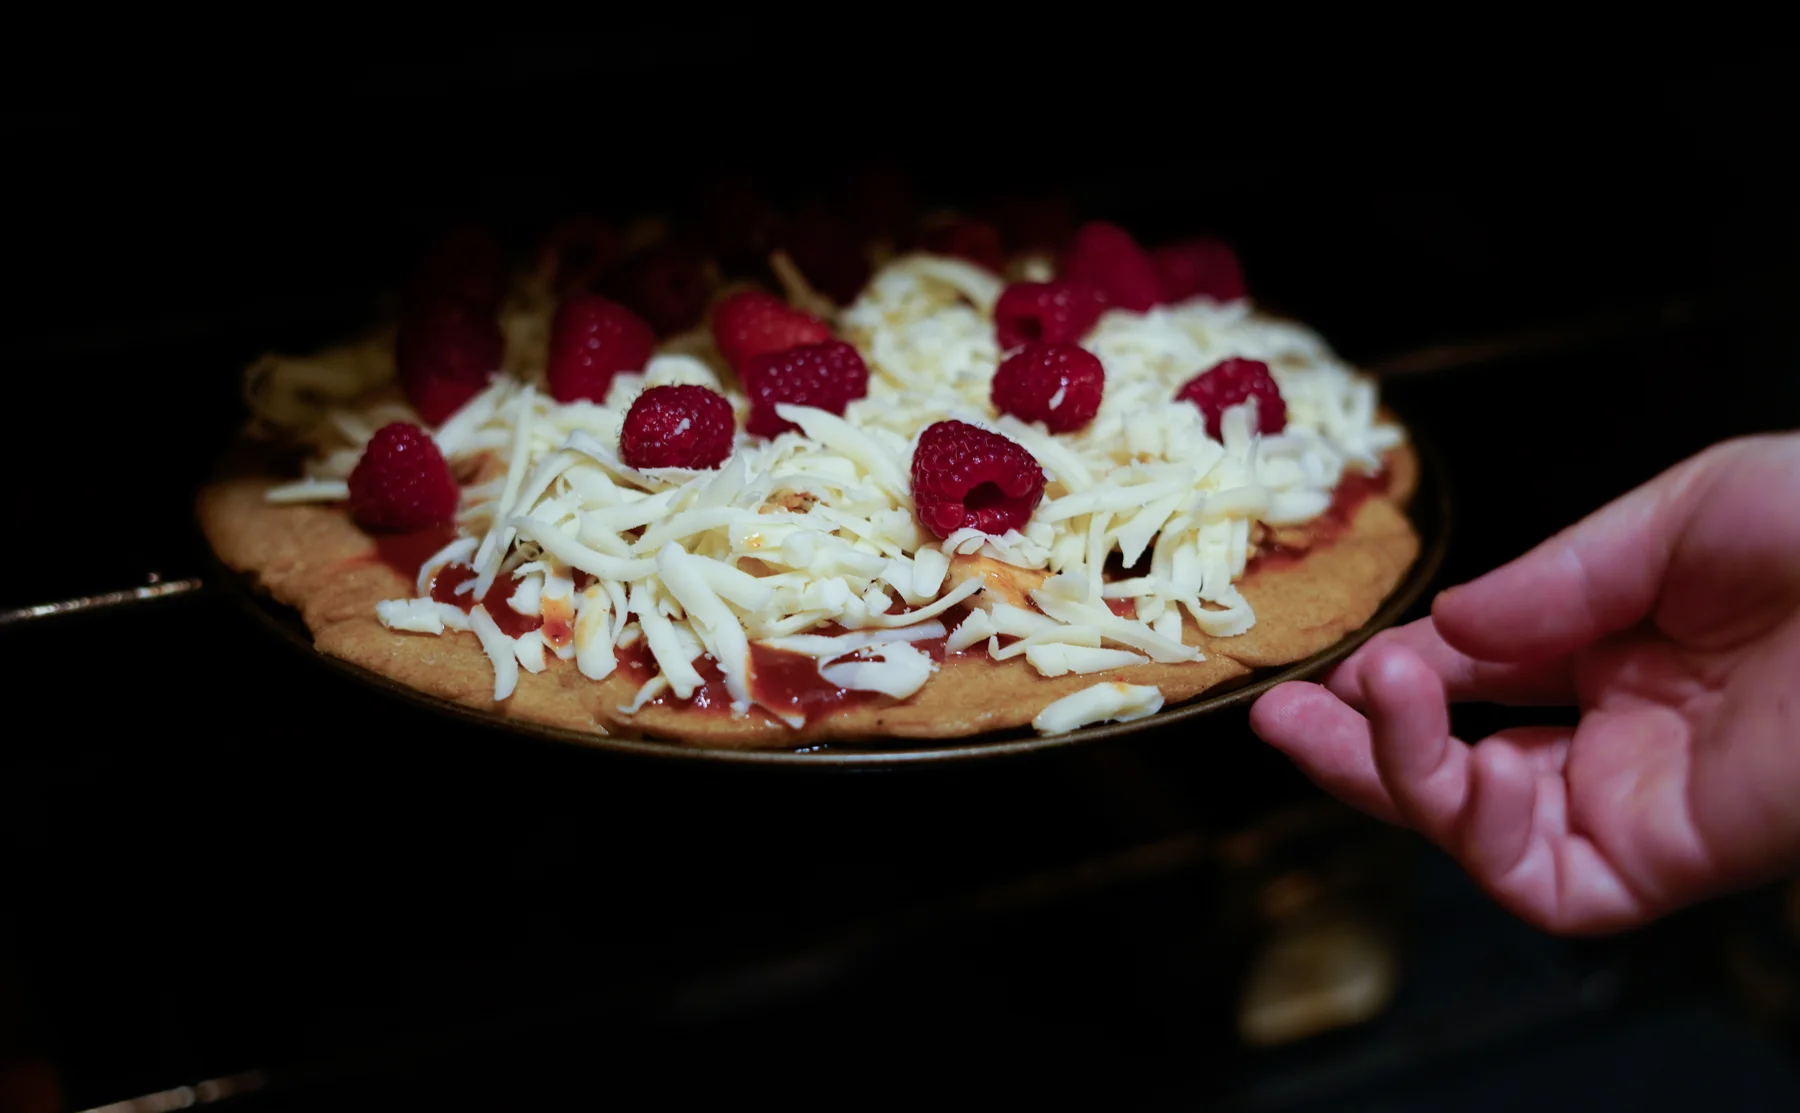 Featured in Business Insider: Unique Berry Pizzas - 1276995